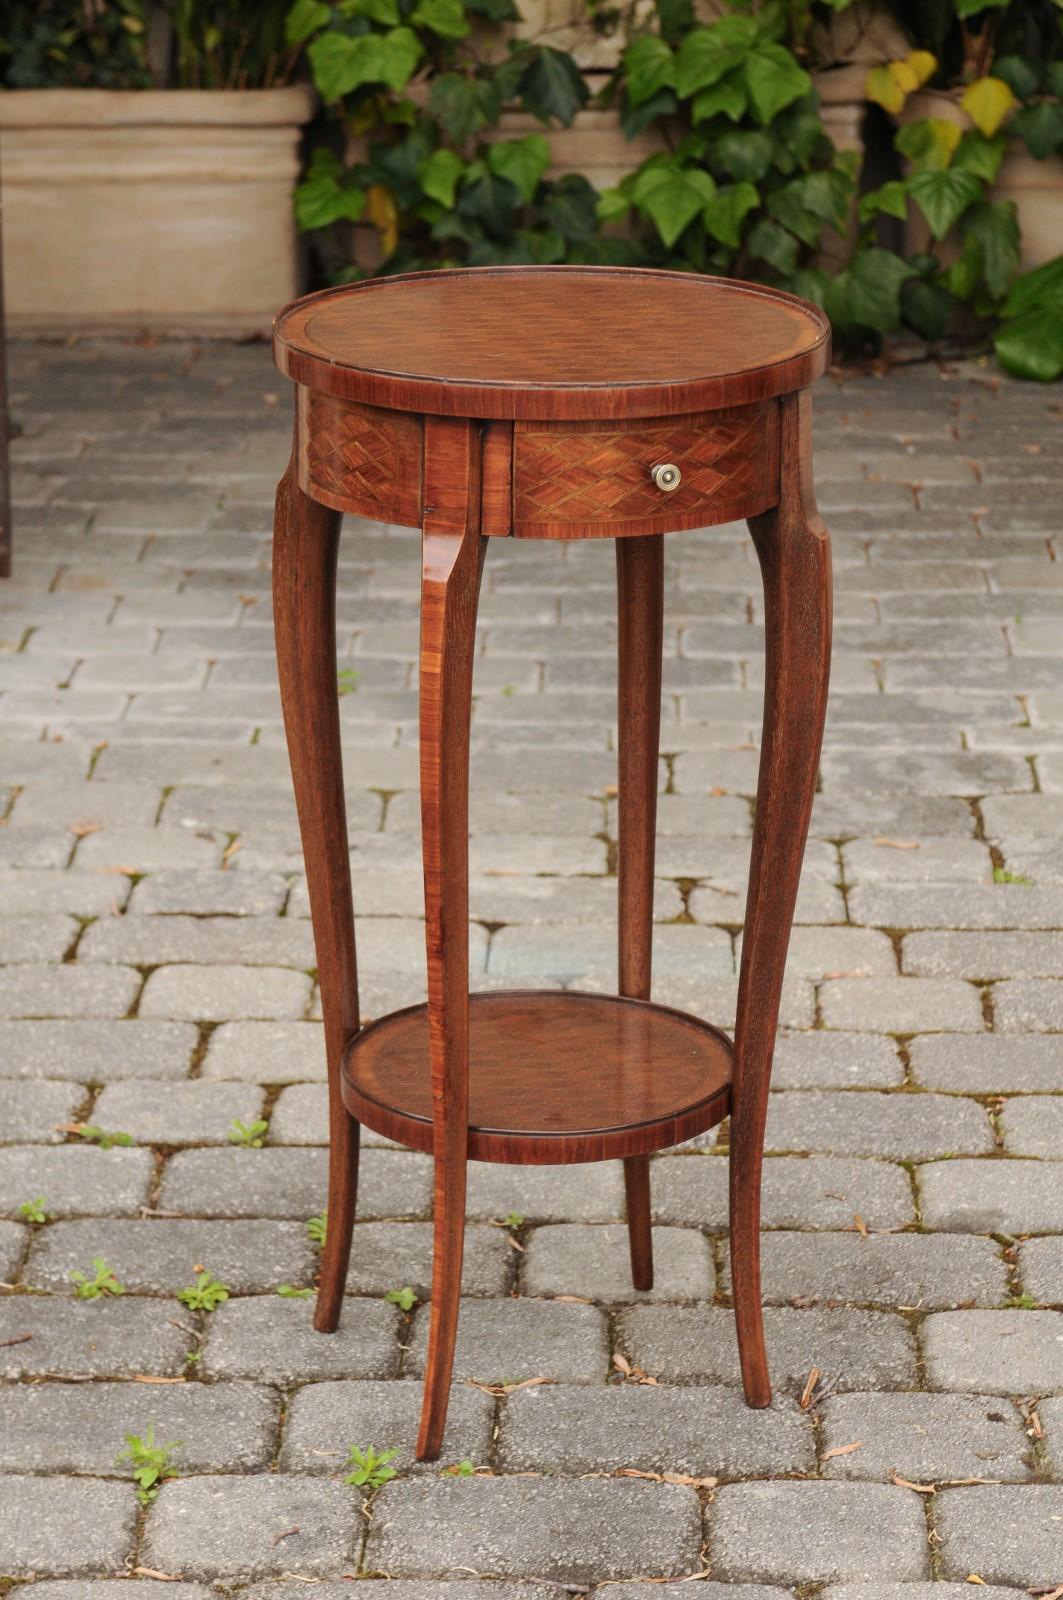 A French mahogany and walnut veneered guéridon side table from the early 20th century, with diamond motifs, single drawer, lower shelf and cabriole legs. Born in France during the Belle Époque era, this exquisite guéridon features a circular top,